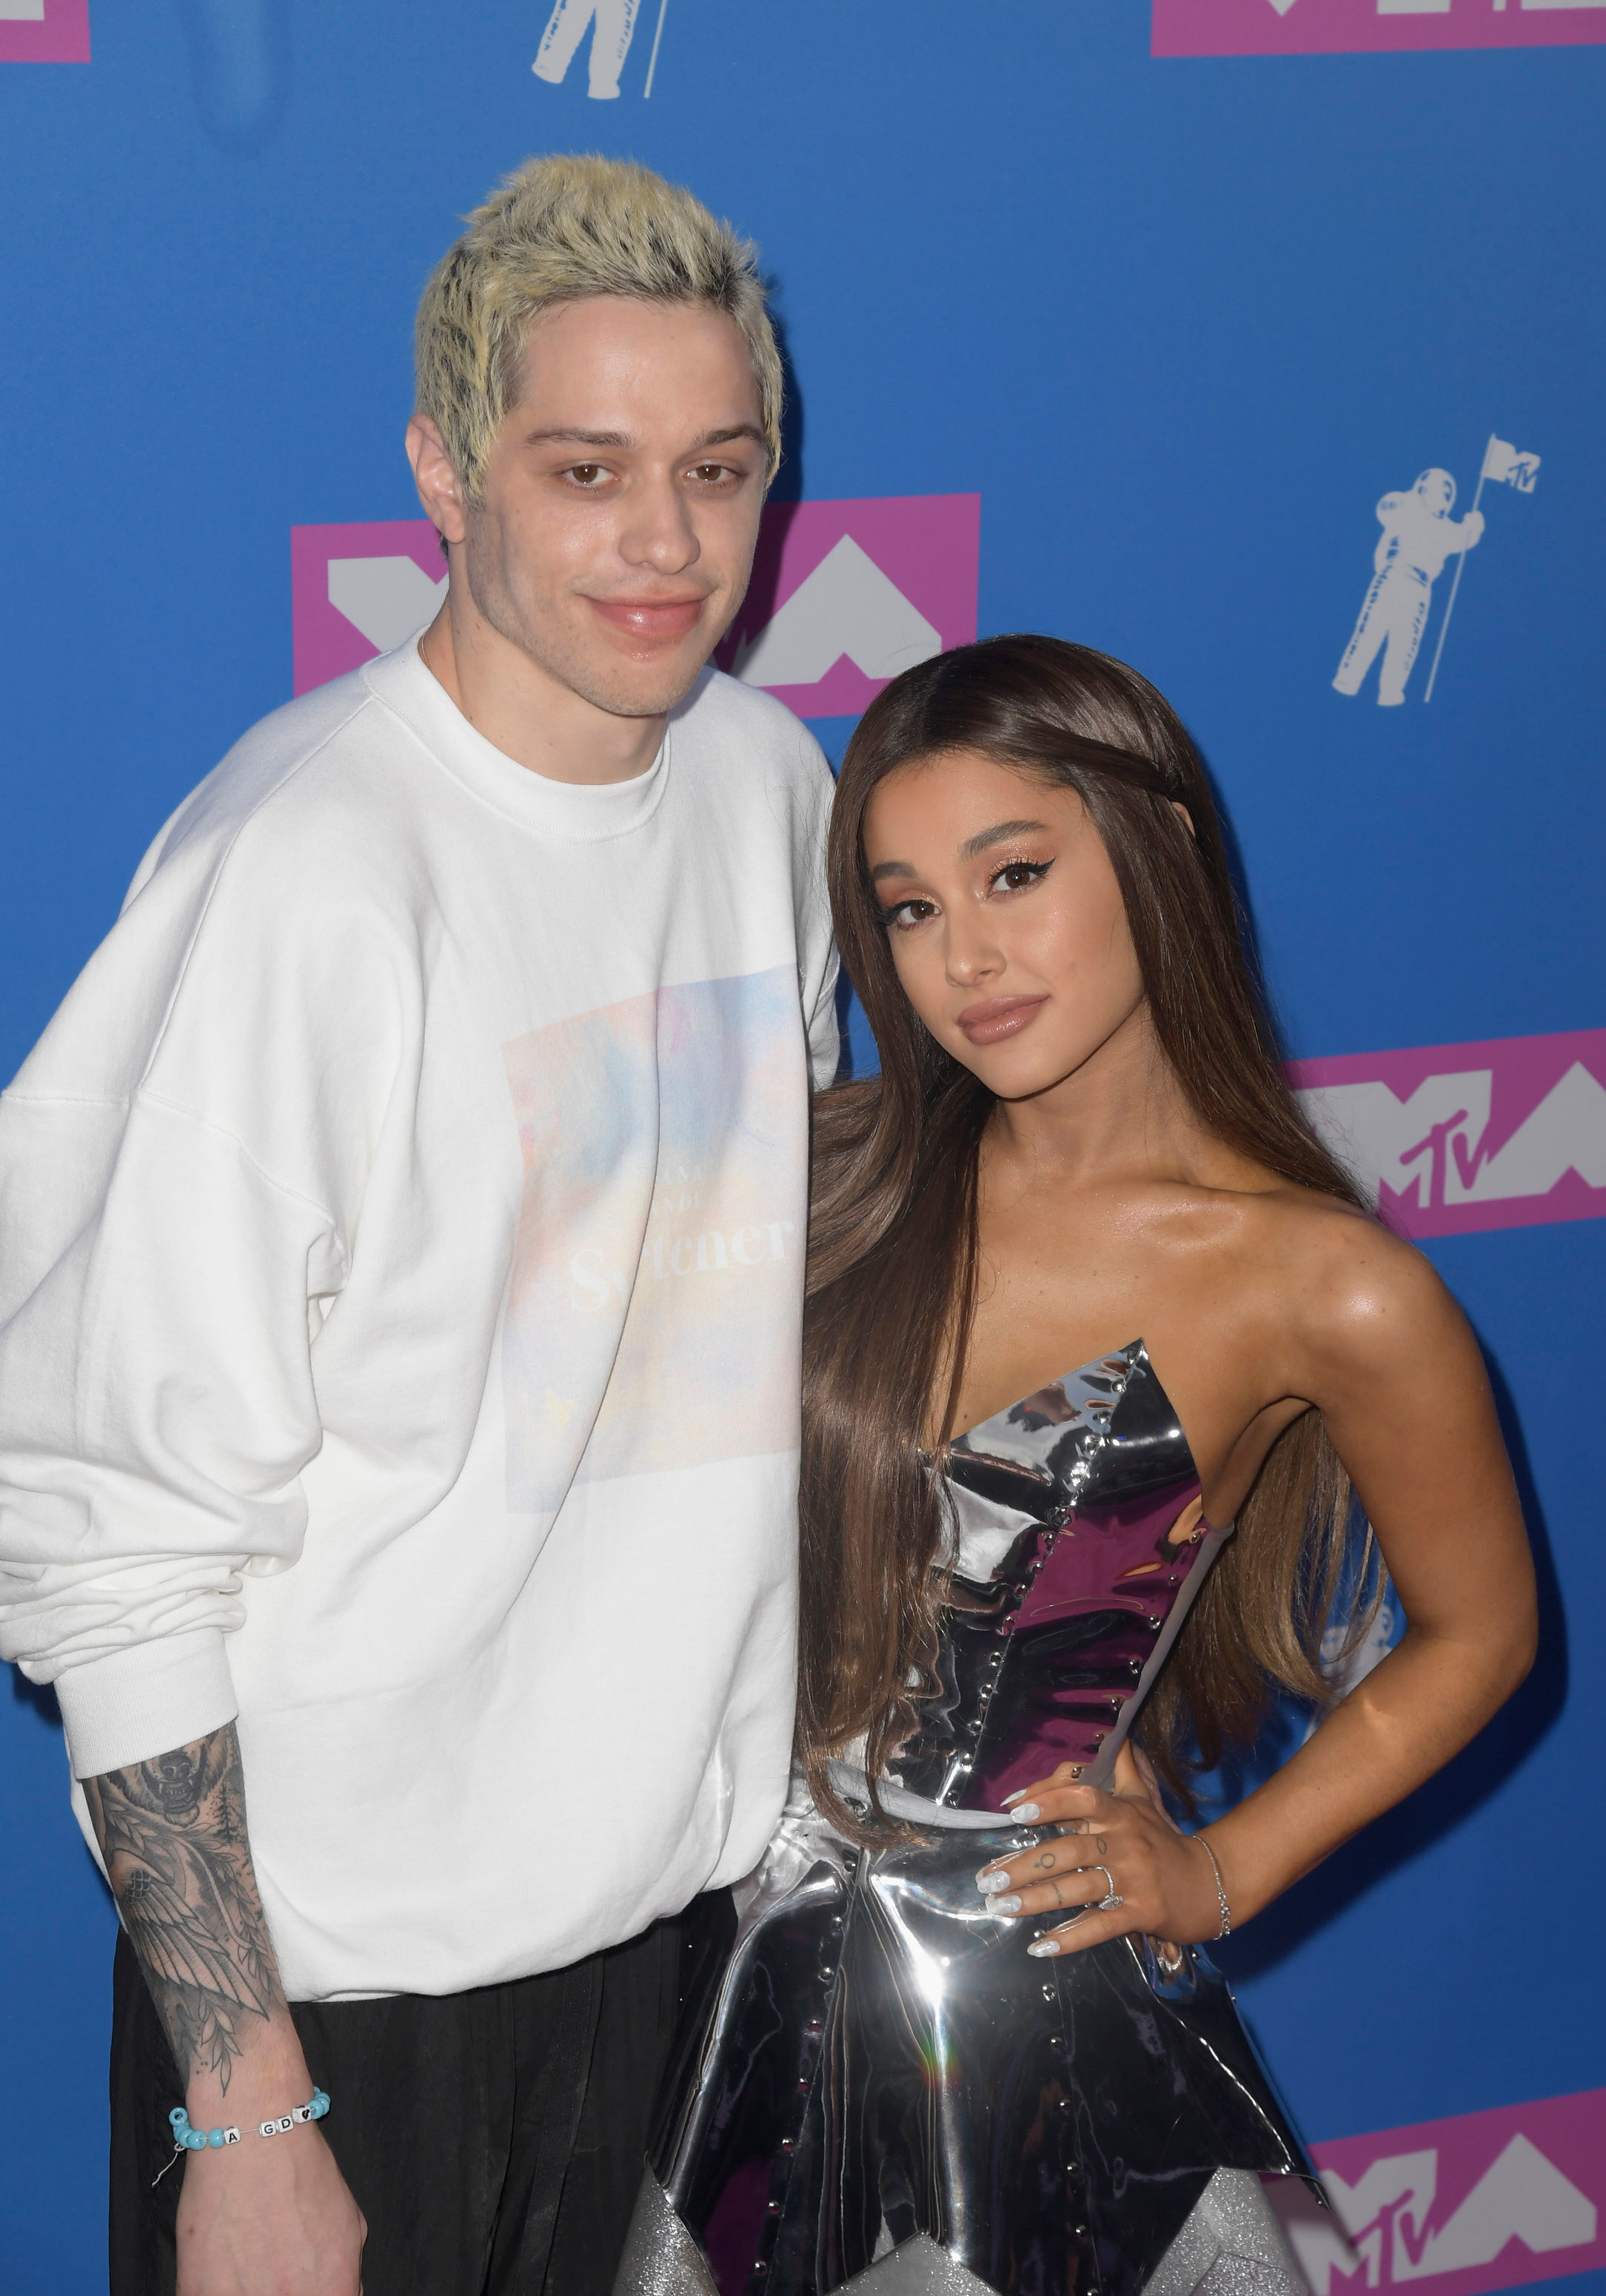 <p><a href="https://www.wonderwall.com/celebrity/profiles/overview/ariana-grande-1540.article">Ariana Grande</a> and Pete Davidson's whirlwind romance in the summer of 2018 might have ended in a <a href="https://www.wonderwall.com/news/ariana-grande-pete-davidson-split-breakup-end-engagement-report-3016840.article">broken engagement</a> that fall, but that doesn't make the former couple's meet cute any less remarkable. Both appeared on "Saturday Night Live" for the first time on the Season 40 opener -- her as the musical guest, him as a new cast member. But they didn't meet then. That happened in March 2016 when Ariana came back to host and started meeting with "SNL" cast members and writers -- including Pete. "I was just, like, listening to him pitch me ideas and stuff and I was like, 'Oh my god.' I just thought he was super-dope," Ariana told the "Zach Sang Show" years later, adding that she grew more intrigued after spotting Pete's Harry Potter-themed tattoos while she was rehearsing her monologue. After their initial meeting, she told a friend (who confirms her story is true), "I'm going to marry him." Time went by. "We didn't even talk for years -- we weren't even friends or anything," she explained. Fast-forward to May 7, 2018. Ariana's manager, Scooter Braun encouraged Pete to go hang out with the "Thank U, Next" singer at her New York City apartment after the <a href="https://www.wonderwall.com/style/fashion/2018-met-gala-see-all-stars-fashions-big-event-3014142.gallery">Met Gala</a> let out that night. "I was f---ing sh---ing my pants," Pete -- who was in sweats and a T-shirt while the pop star was still all dressed up after having attended the fashion benefit -- told Howard Stern, explaining that they played "Quiplash" with some of her friends when he arrived. When Ariana's pals left, "I literally was like, 'Hi, can I kiss you, please?'" Pete told Howard. A month later, they were <a href="https://www.wonderwall.com/celebrity/ariana-grandes-engagement-ring-cost-pete-davidson-almost-100k-plus-more-news-3014779.gallery">engaged</a>.</p>